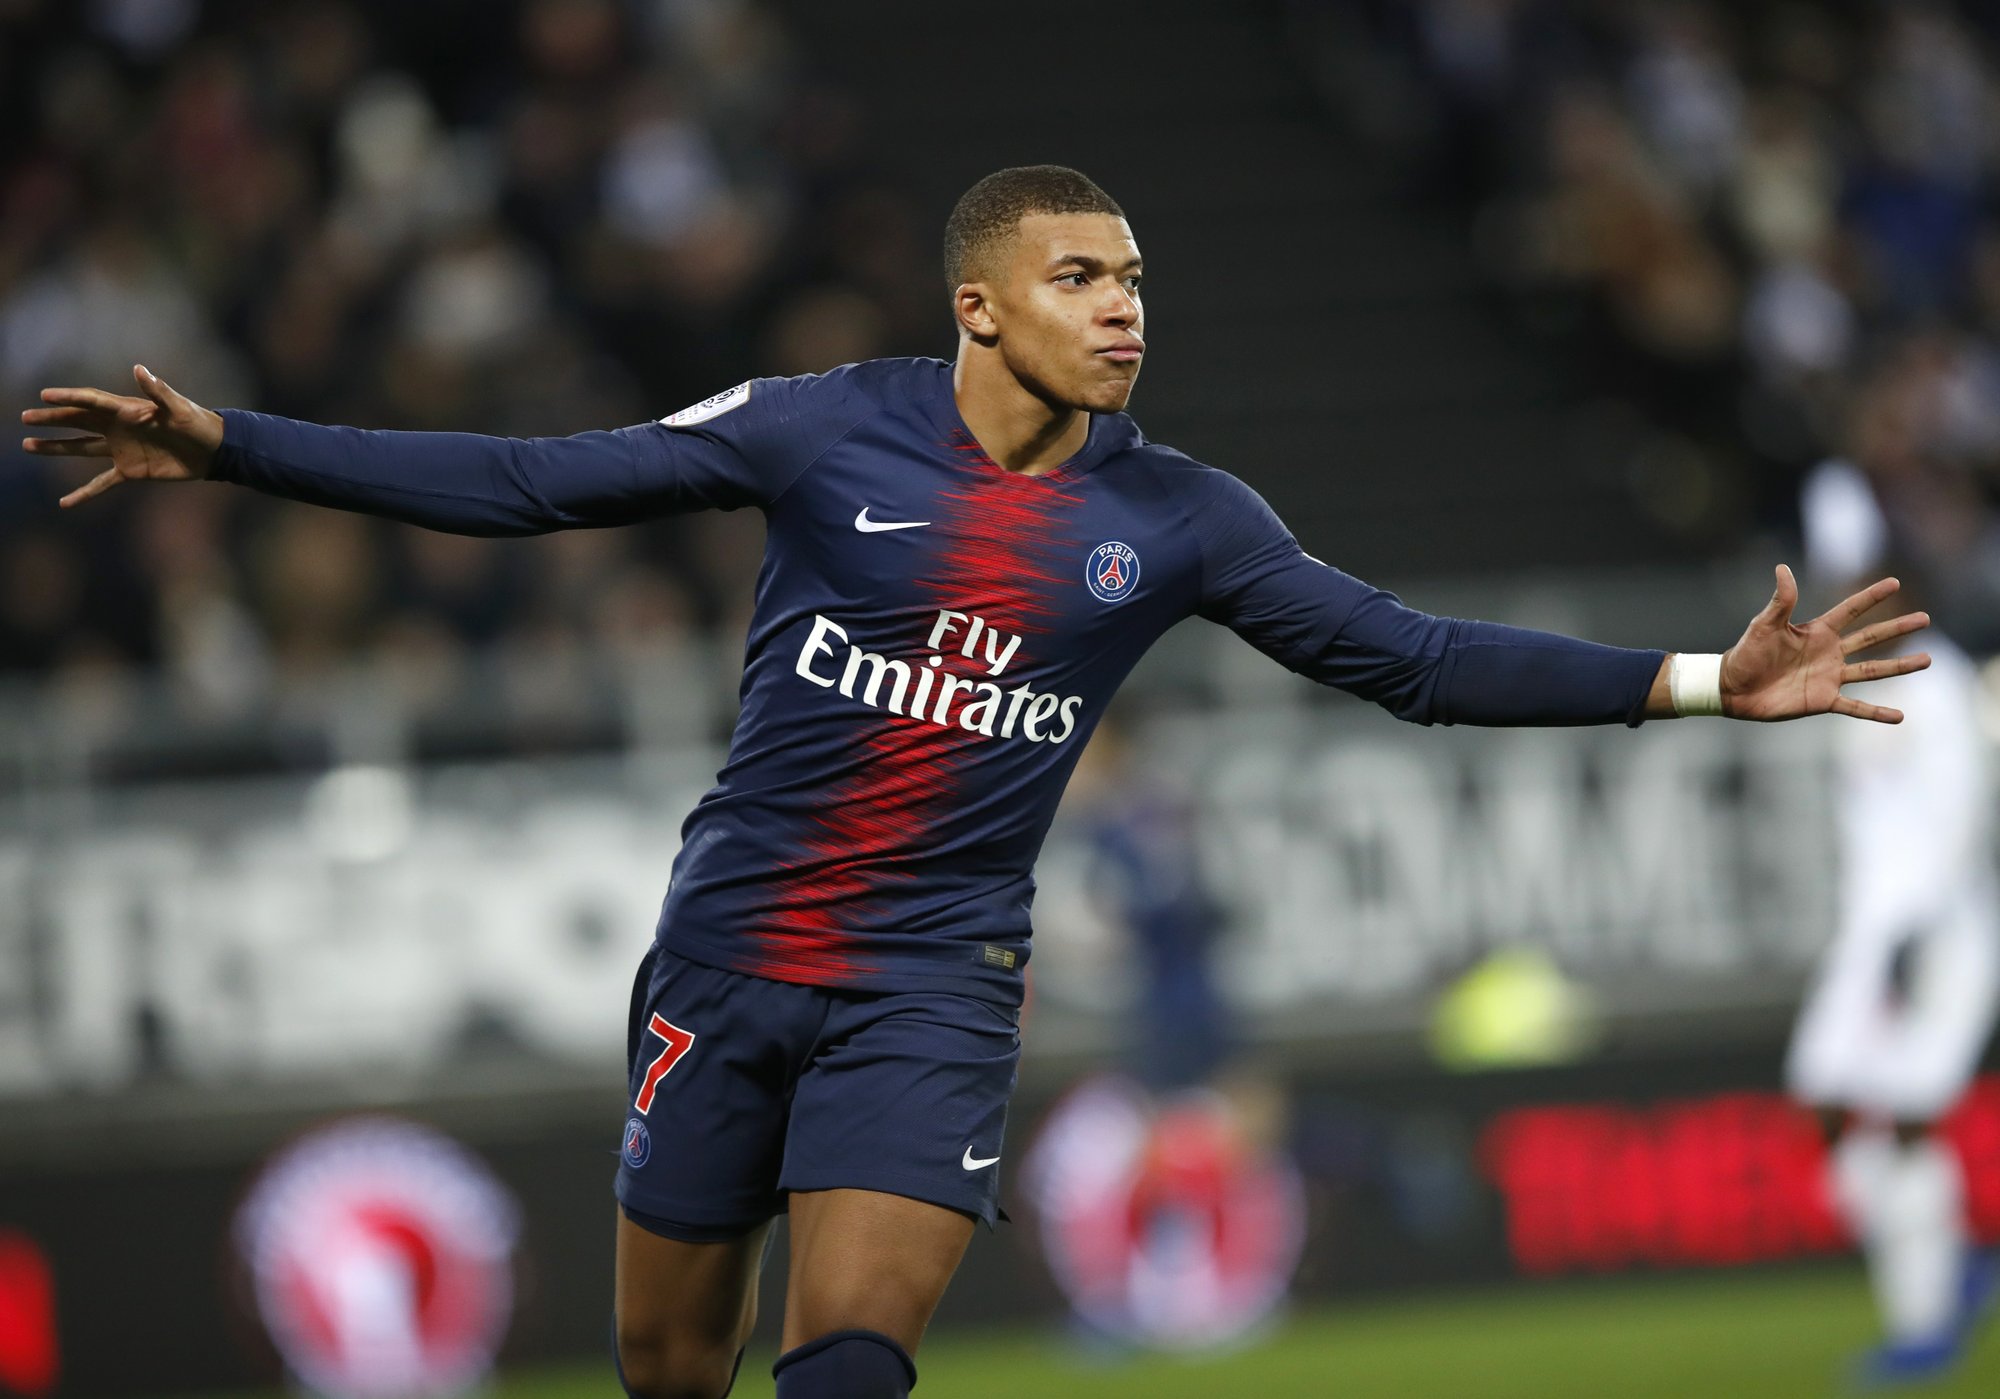 chuyển nhượng real, chuyển nhượng psg, mbappe, mbappe real, mbappe real madrid